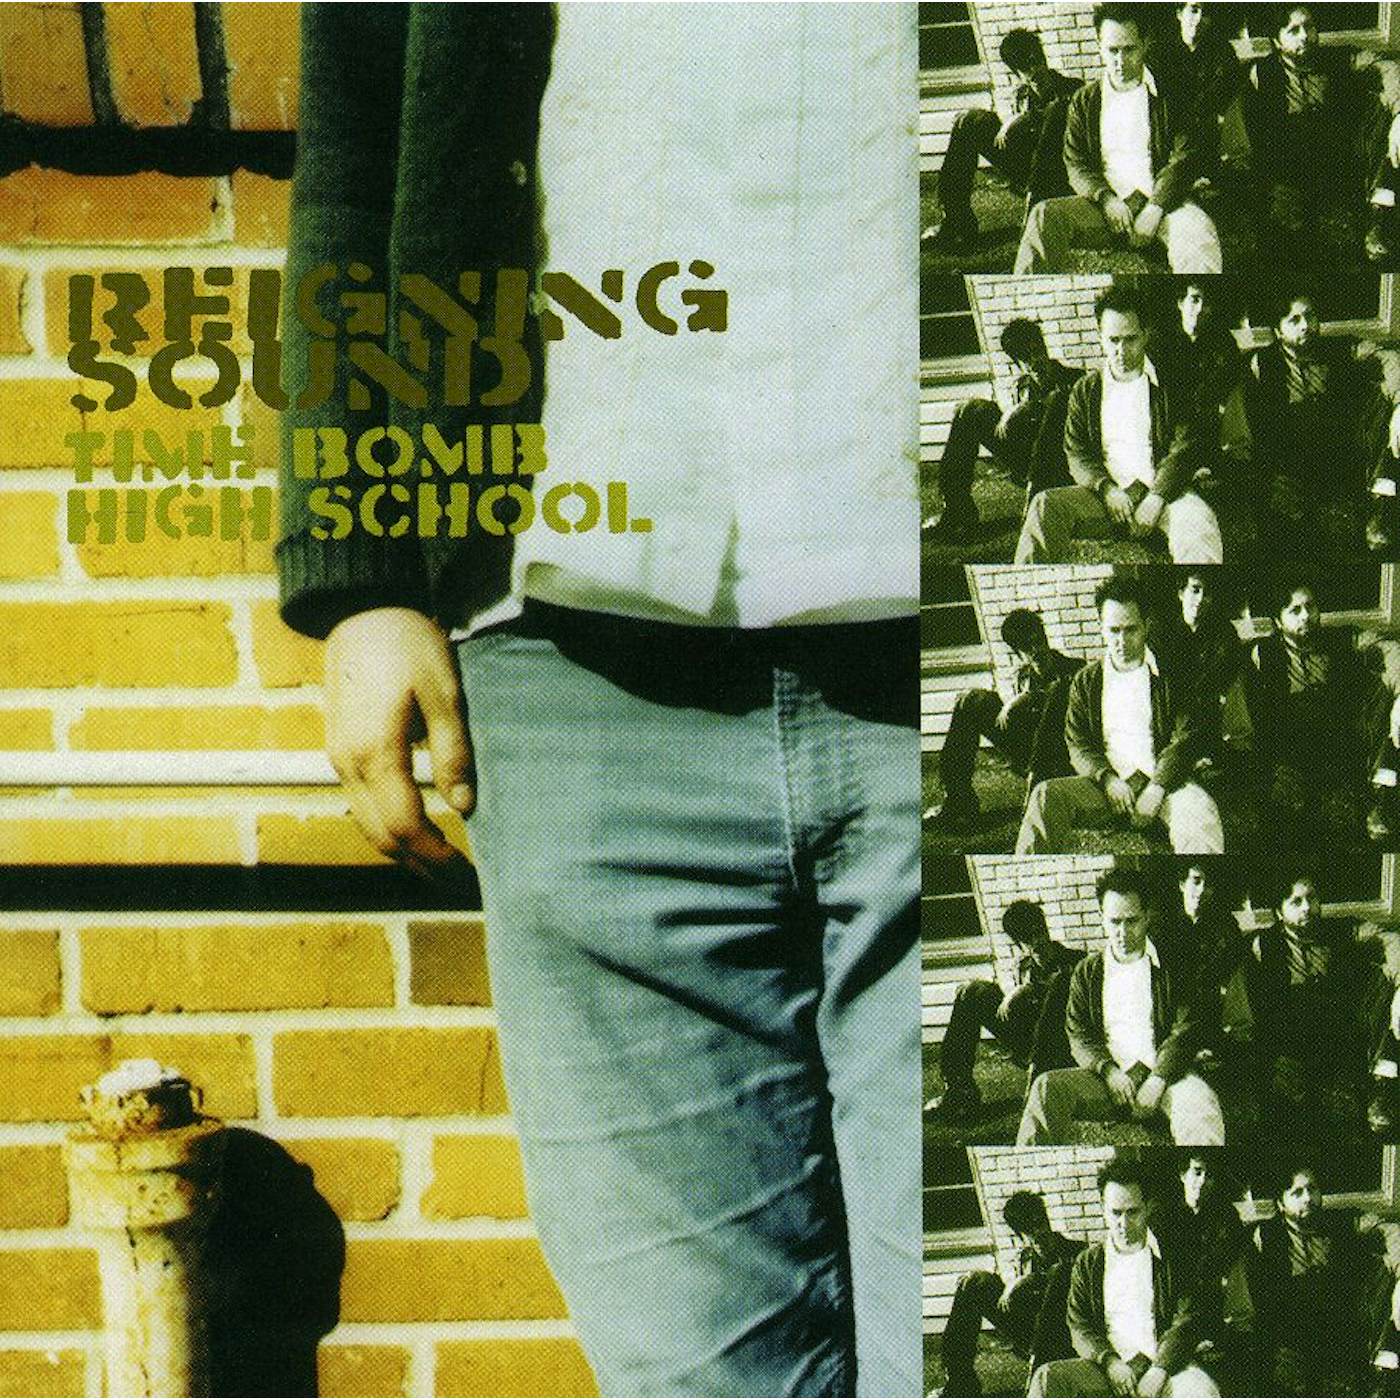 Reigning Sound TIME BOMB HIGH SCHOOL CD